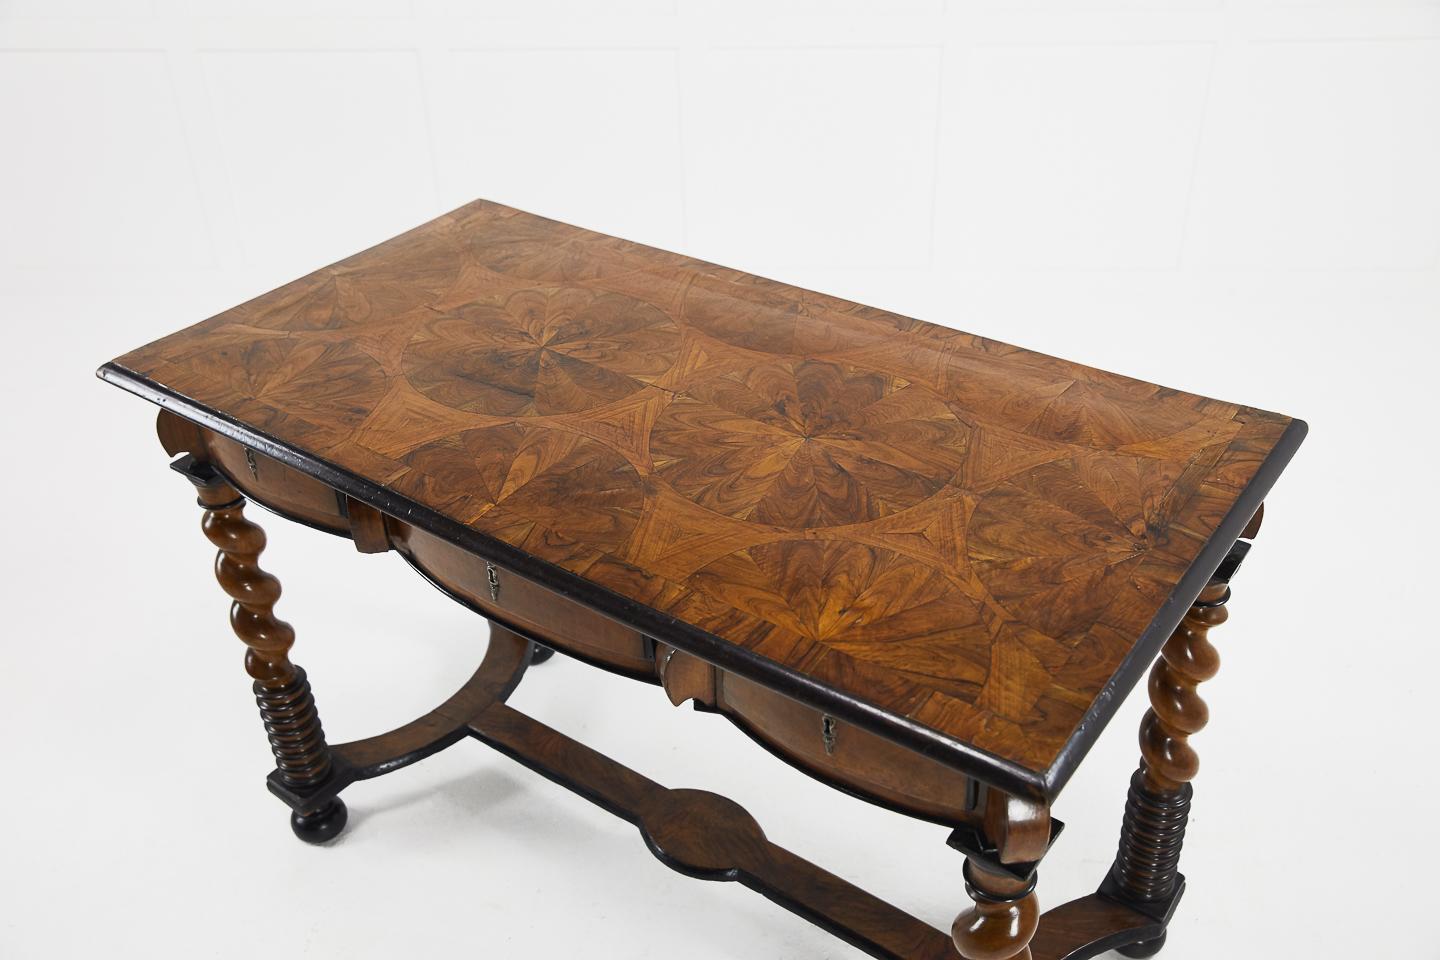 Early 18th Century French three-drawer walnut table with beautifully inlaid geometric patterned top.